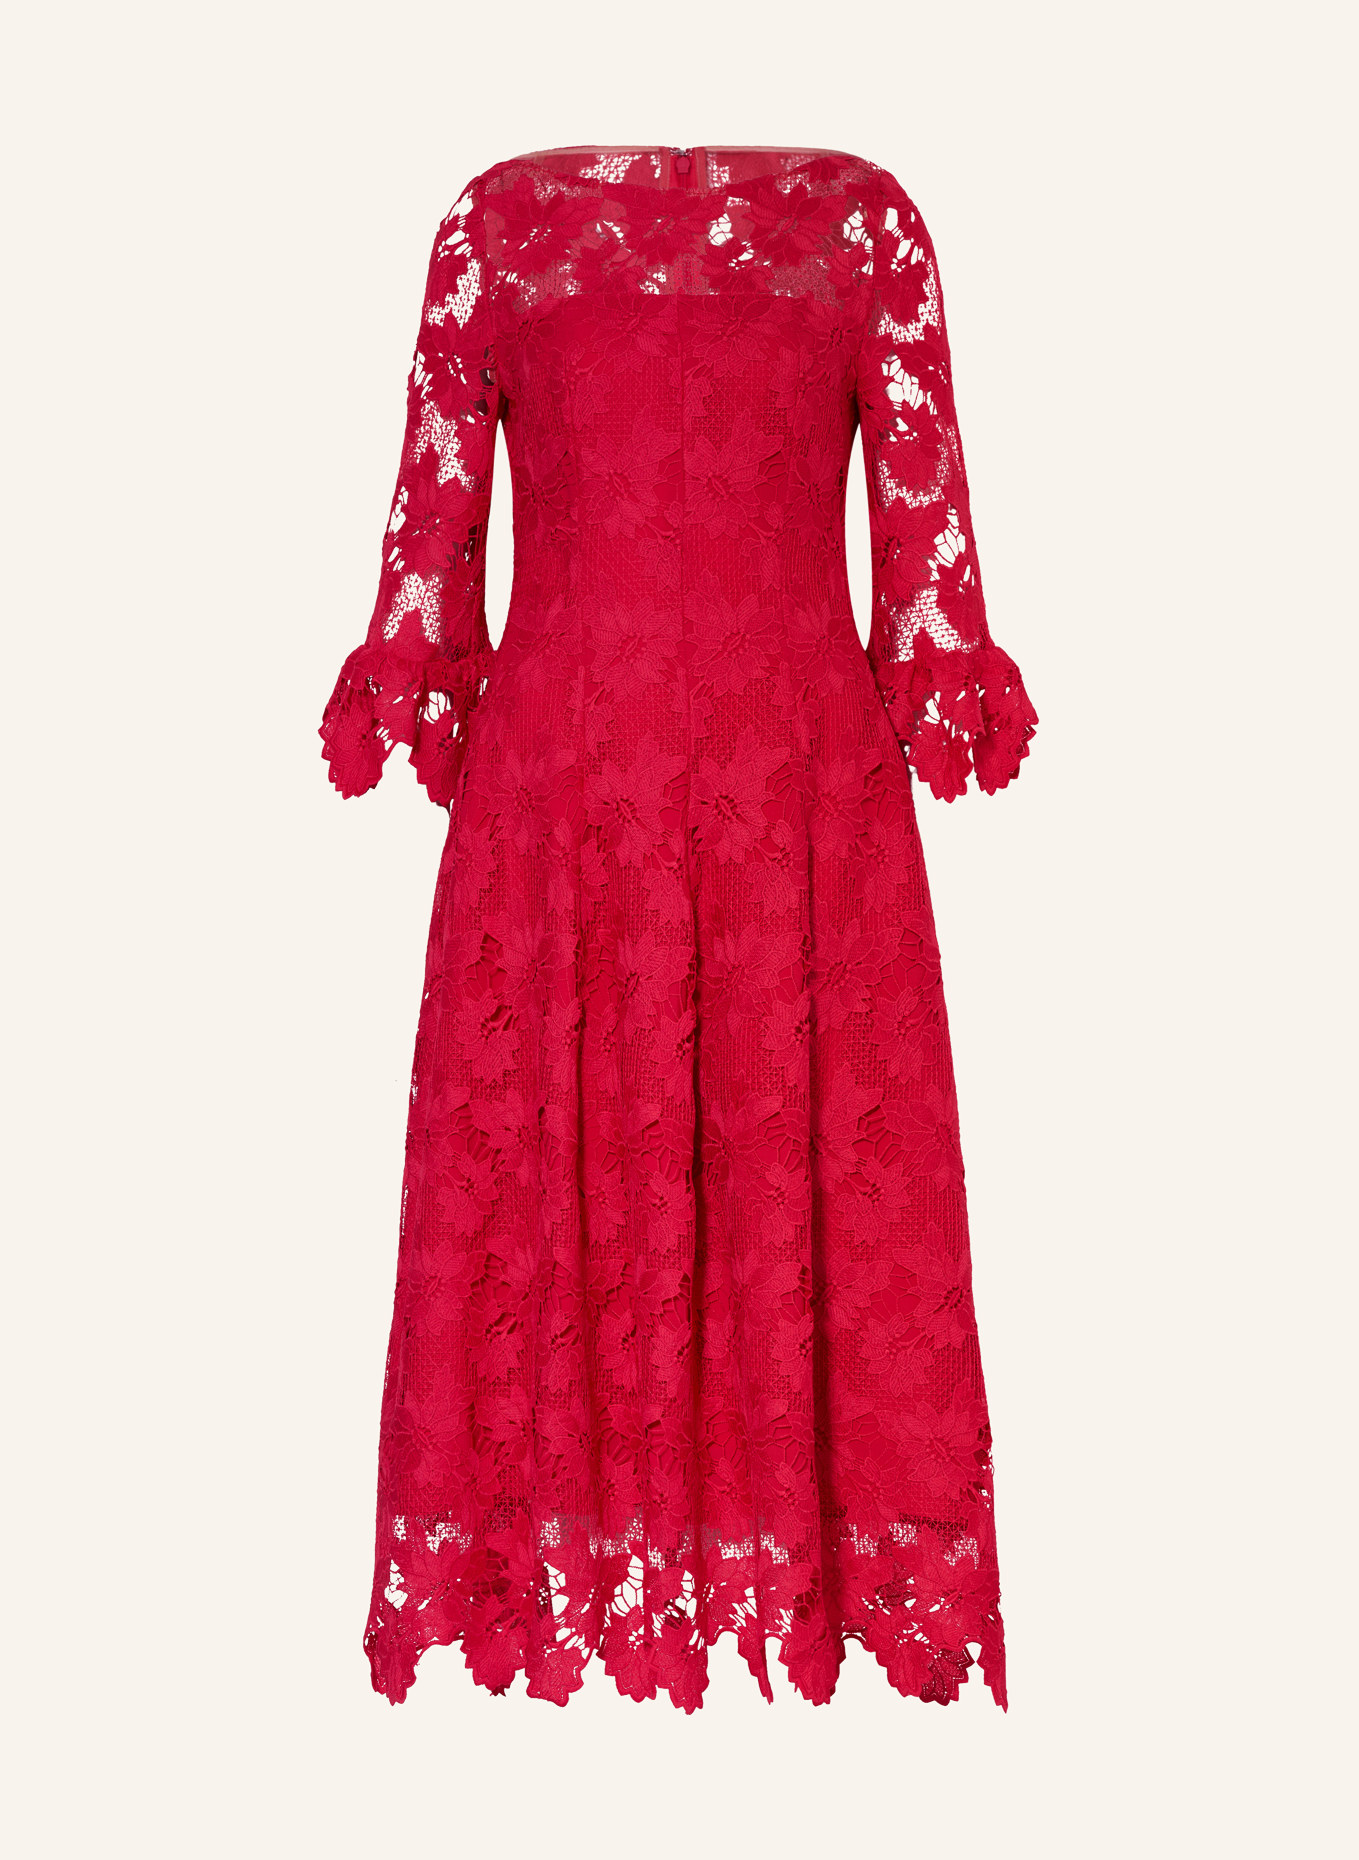 TALBOT RUNHOF Lace dress with 3/4 sleeve, Color: PINK (Image 1)